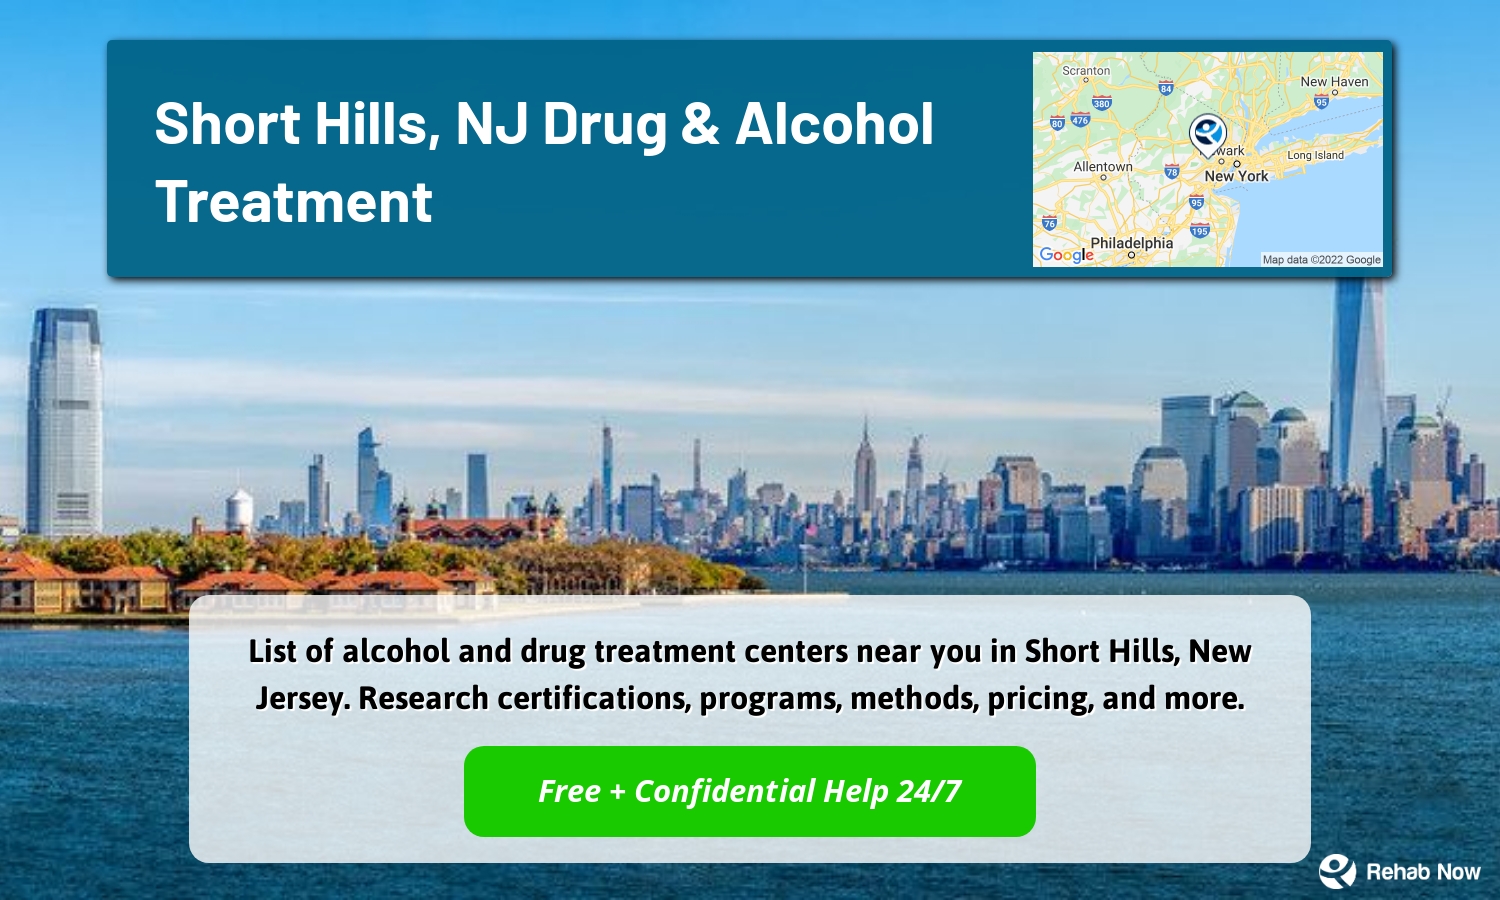 List of alcohol and drug treatment centers near you in Short Hills, New Jersey. Research certifications, programs, methods, pricing, and more.